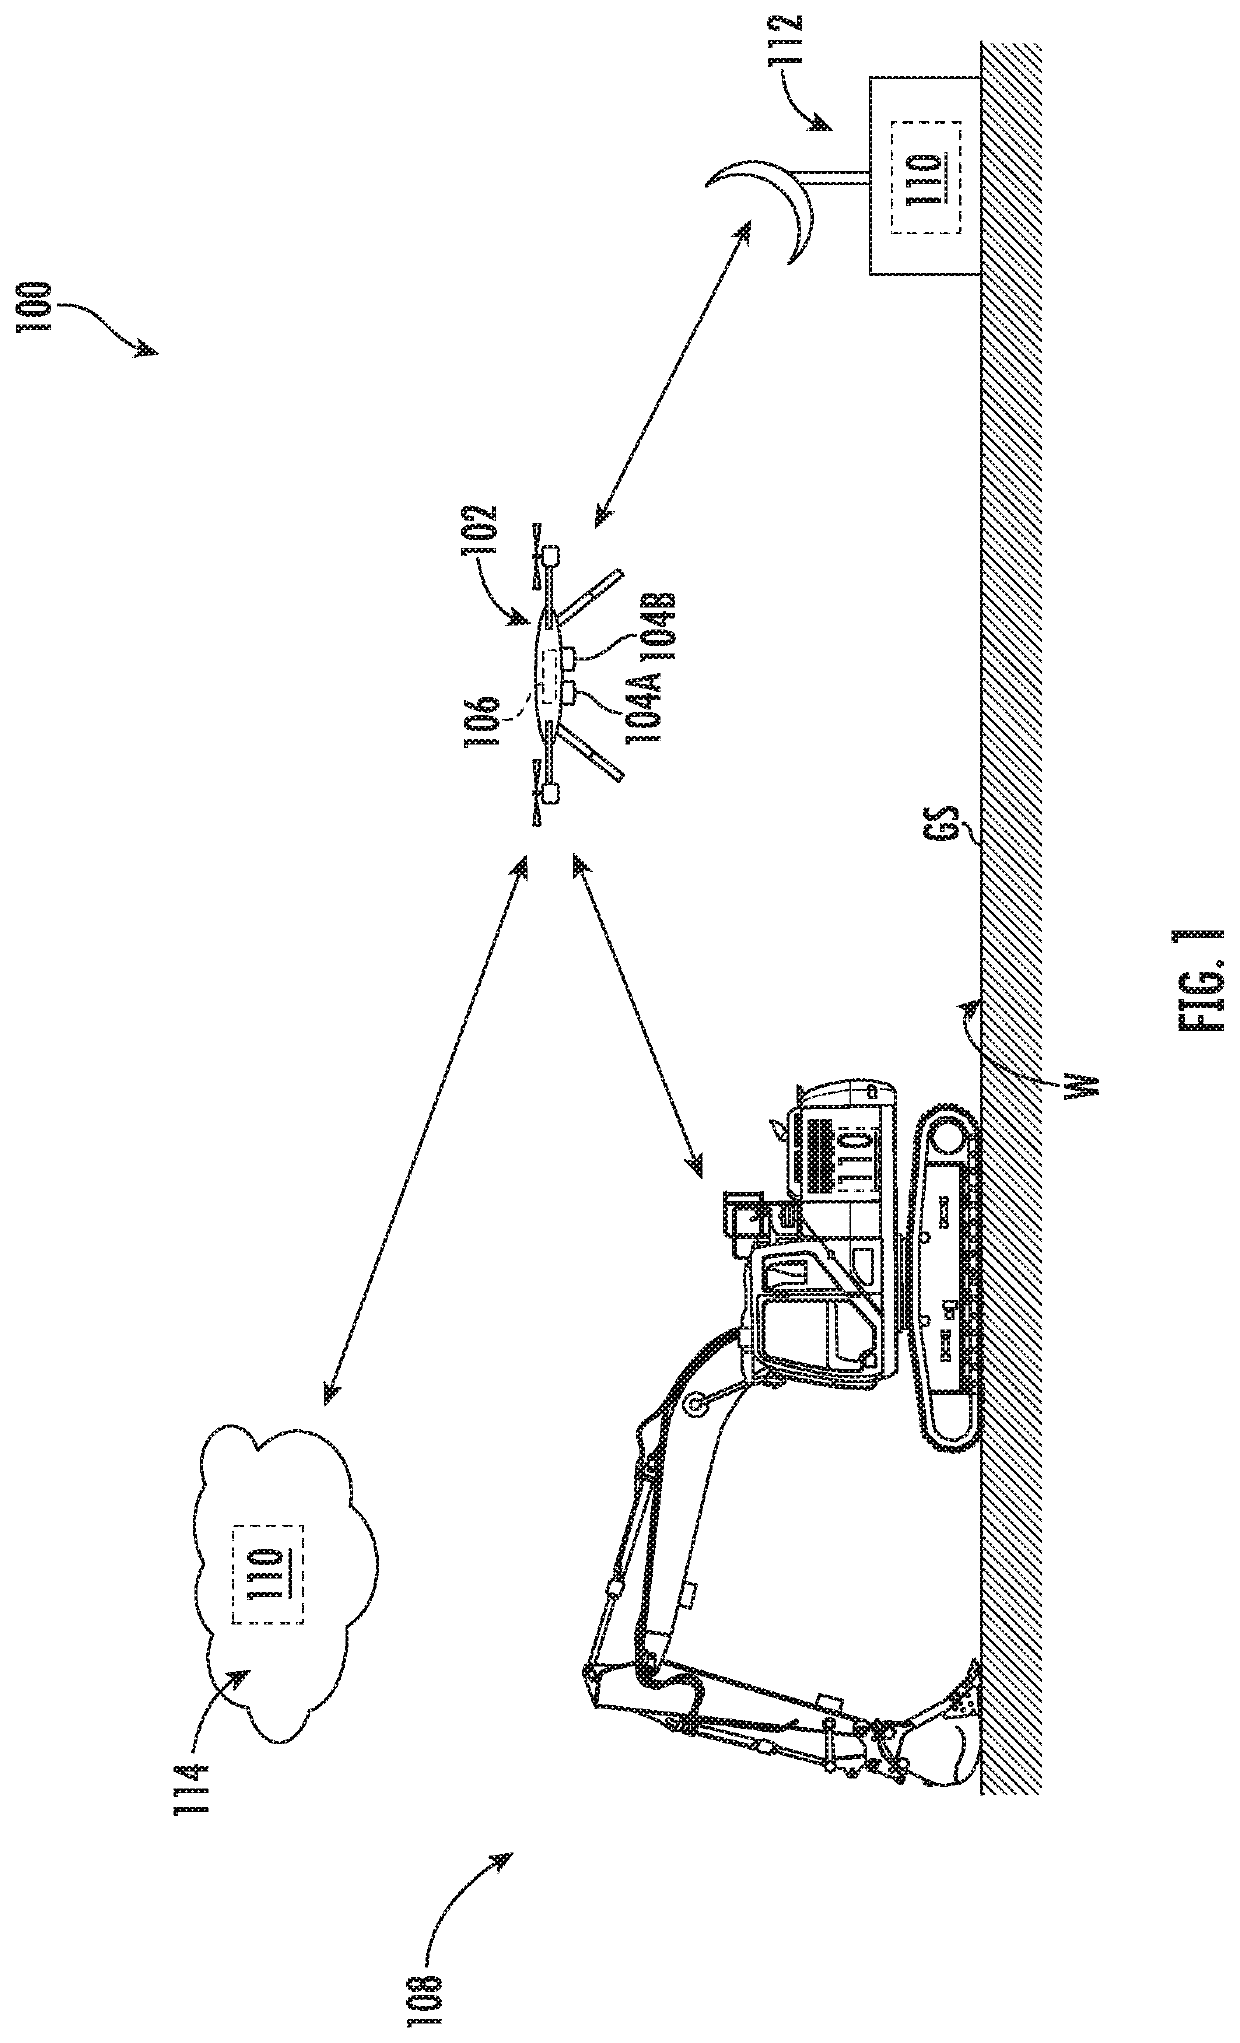 Systems and methods for generating earthmoving prescriptions